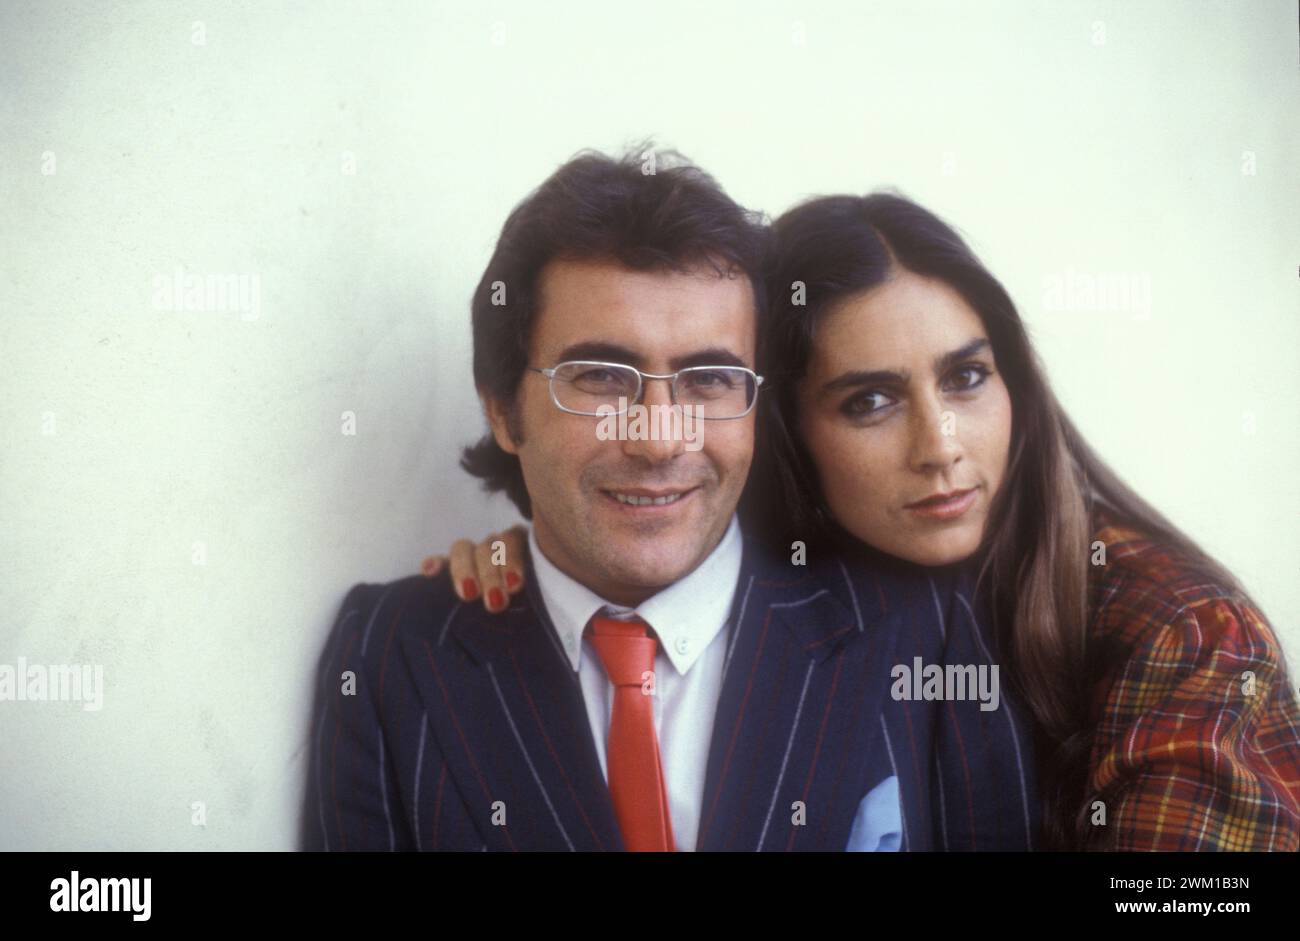 4066384 Sanremo Music Festival 1984. Italian pop singers Al Bano and Romina Power, at the festival with the winner song 'Ci sarà ' (In English: there will be) (photo); (add.info.: Sanremo, Italy; Italia, Festival di Sanremo 1984  Festival di Sanremo 1984. I cantanti Al Bano e Romina Power, al festival con la canzone vincitrice 'Ci sarà '); © Marcello Mencarini. All rights reserved 2024. Stock Photo